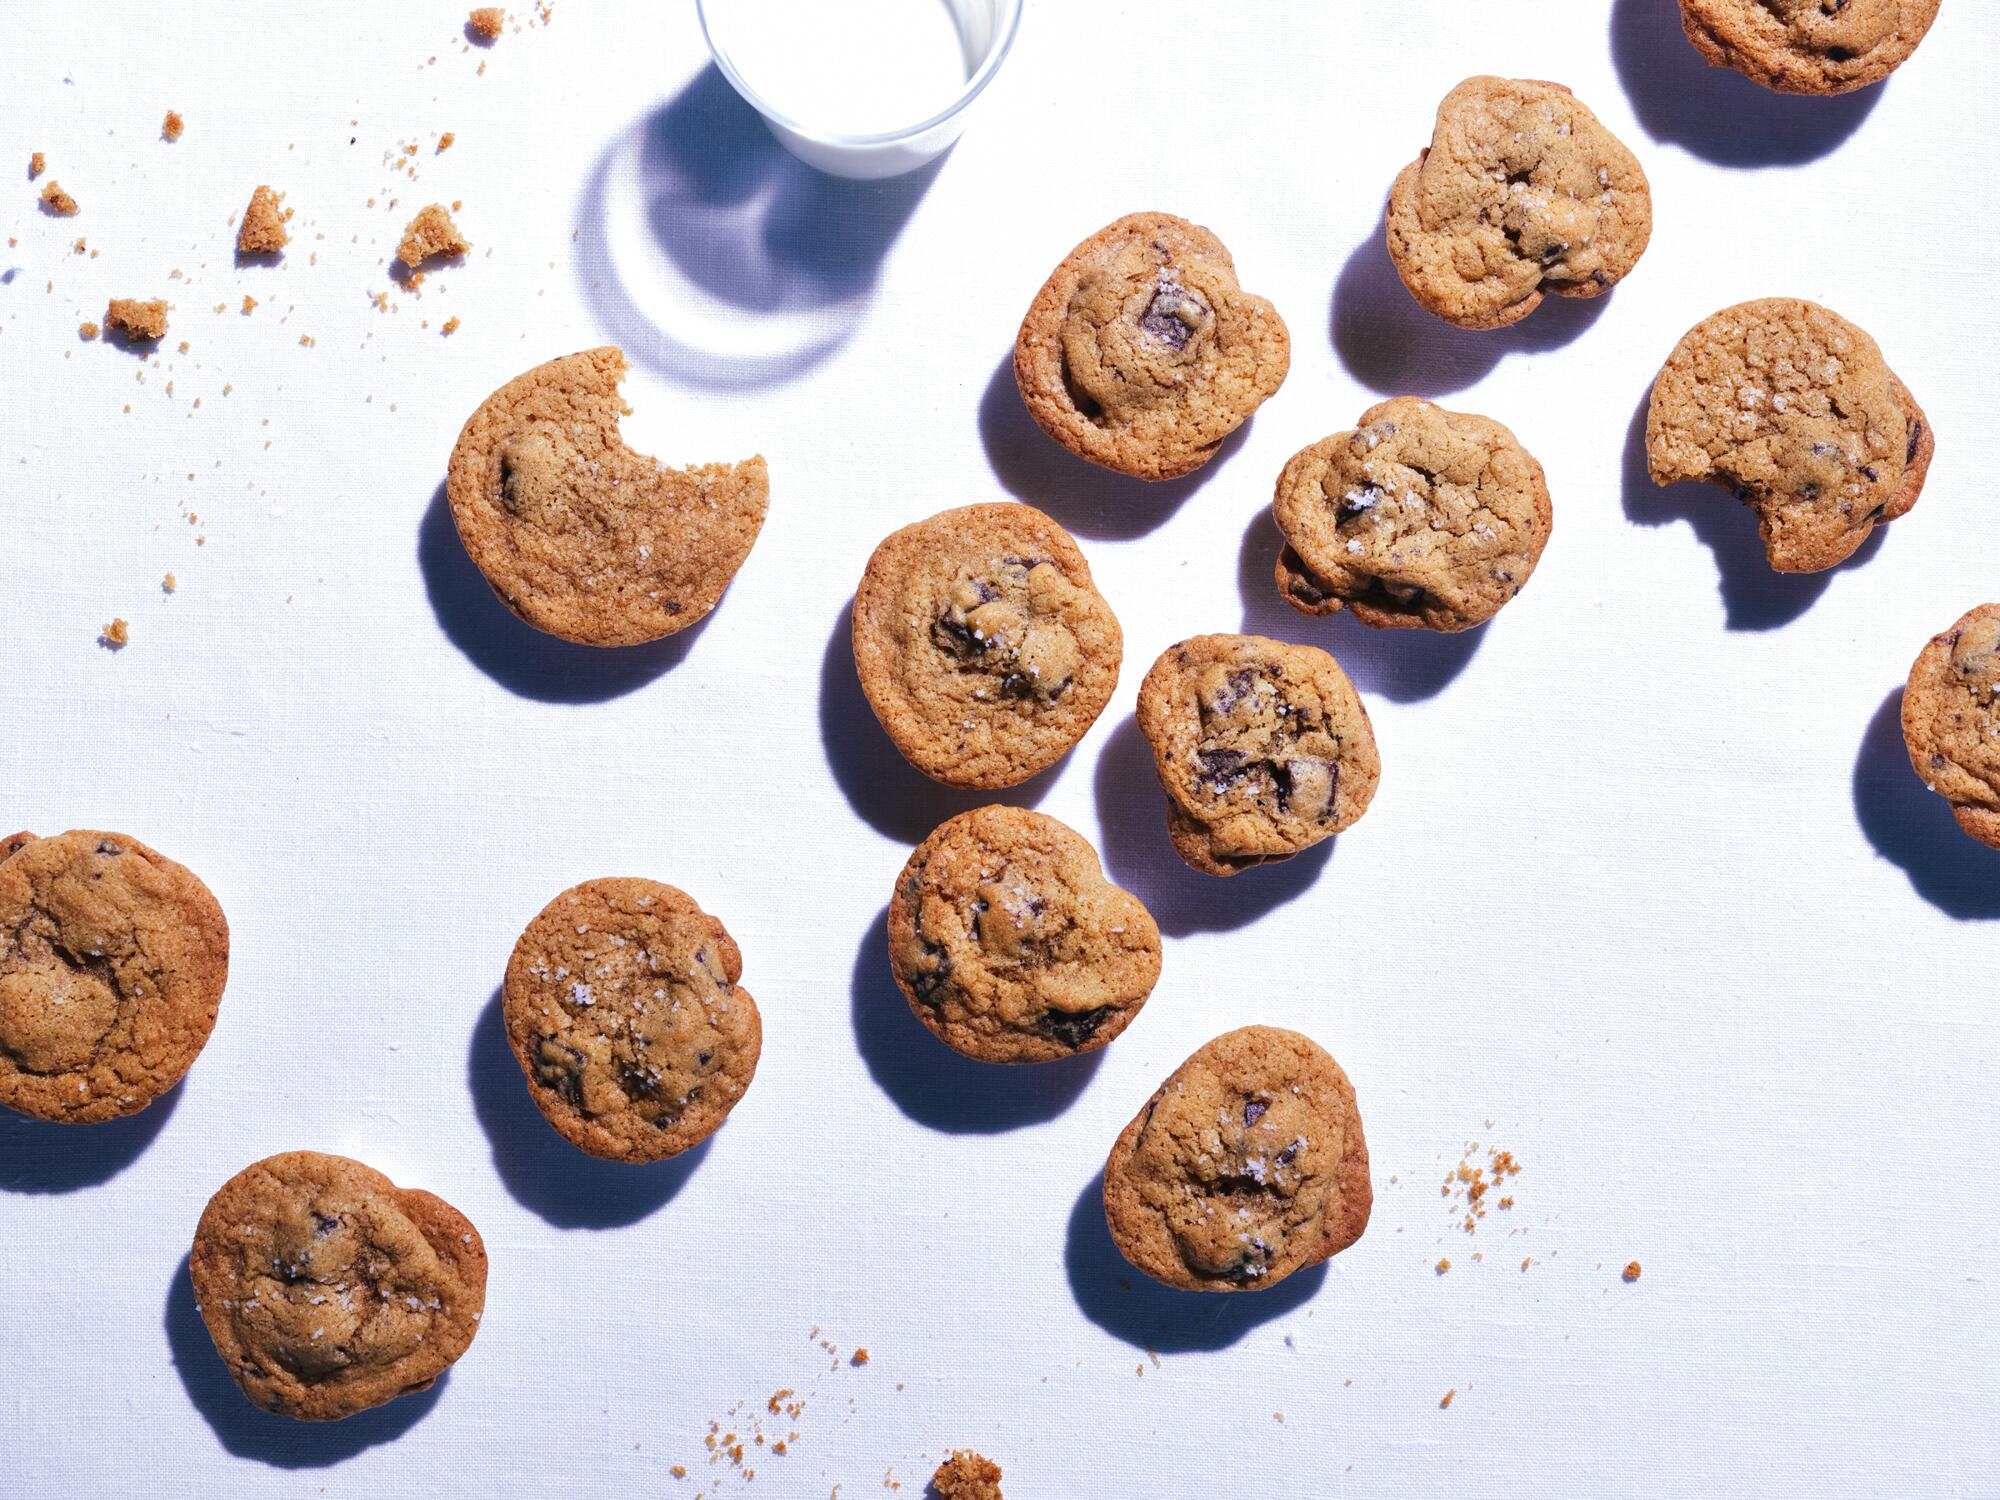 Ultimate chocolate chip cookies spread across a white surface, a glass of milk nearby.